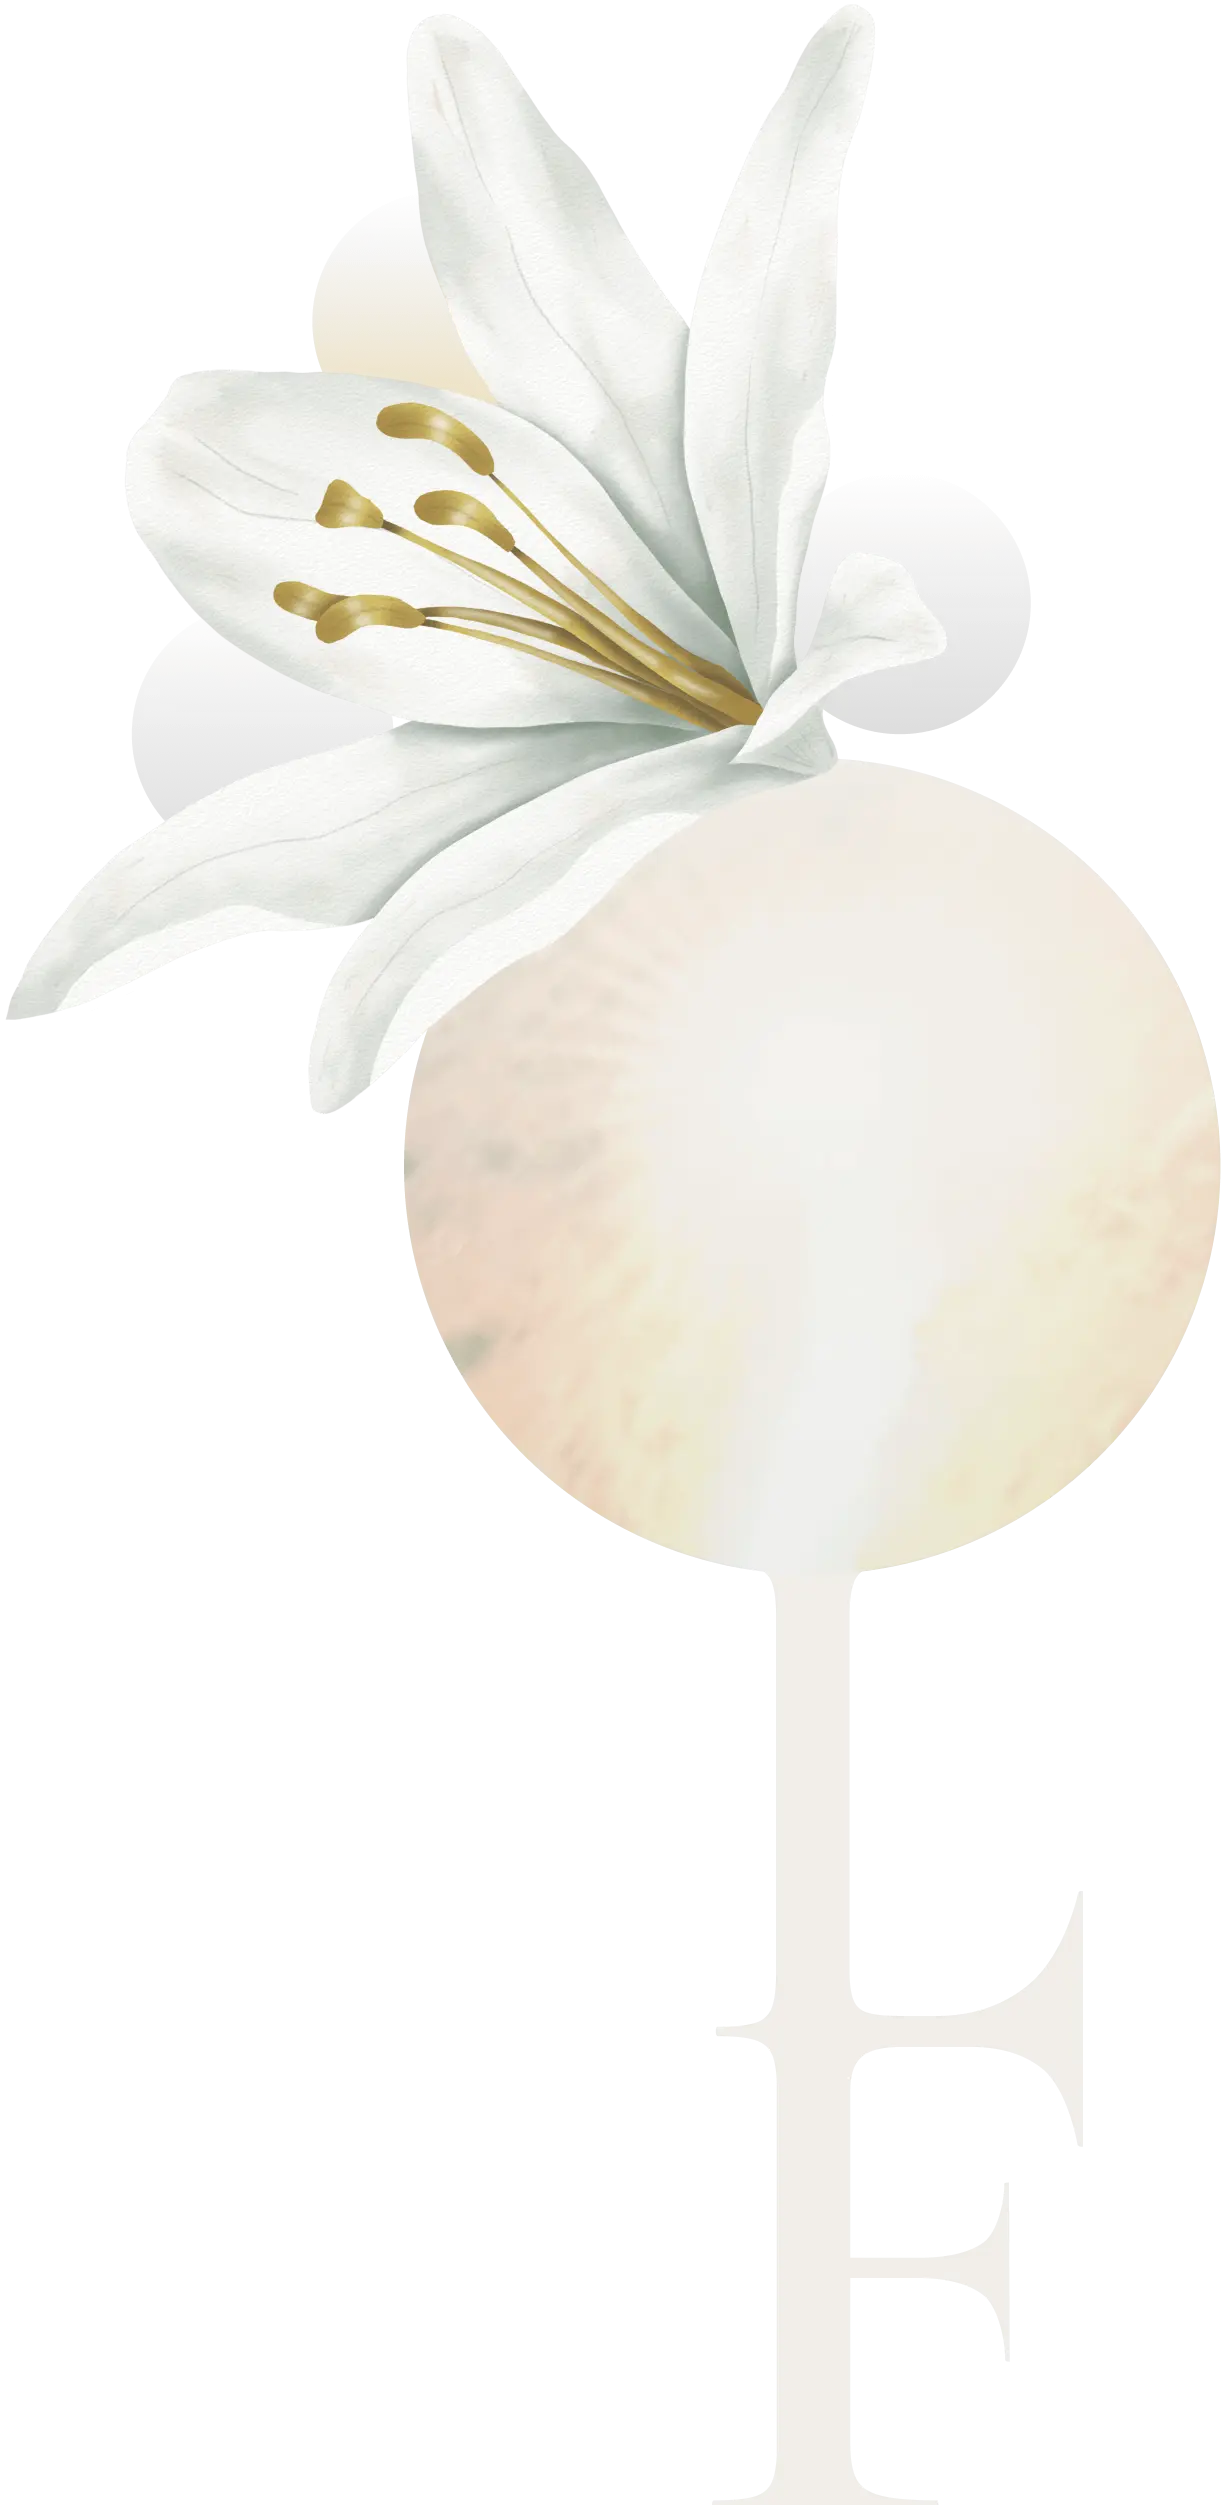 LLOVE Foundation - An image of a lily flower, symbolizing purity